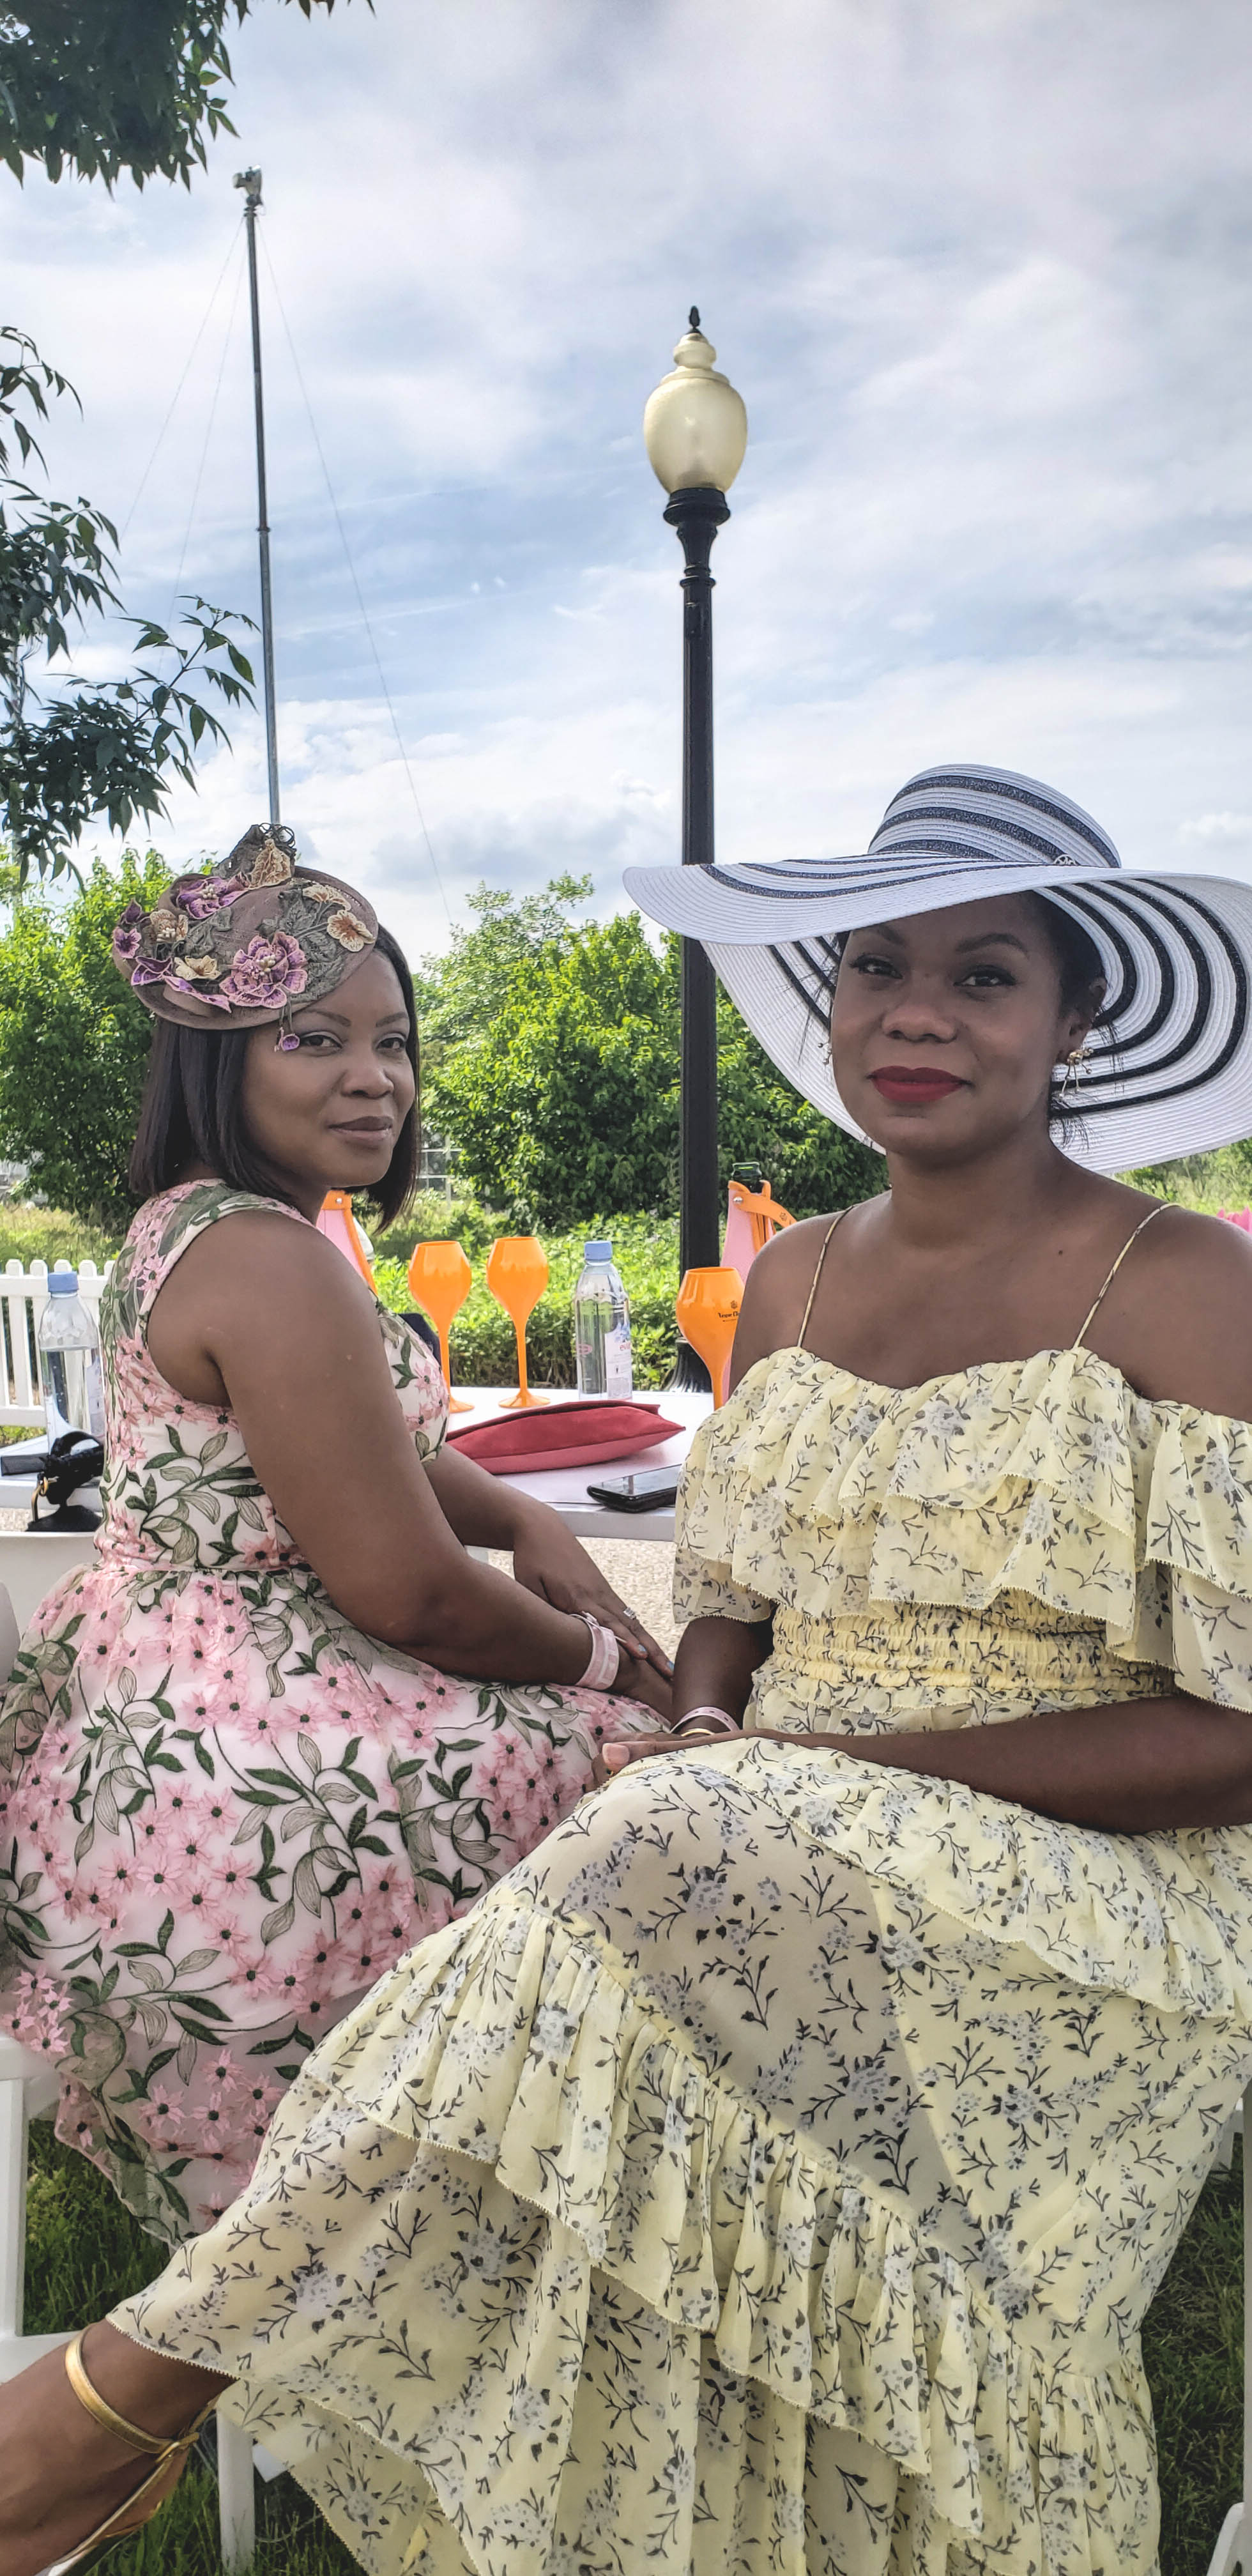 Street Style Was In Full Effect At The 11th Annual Veuve Clicquot Polo Classic
